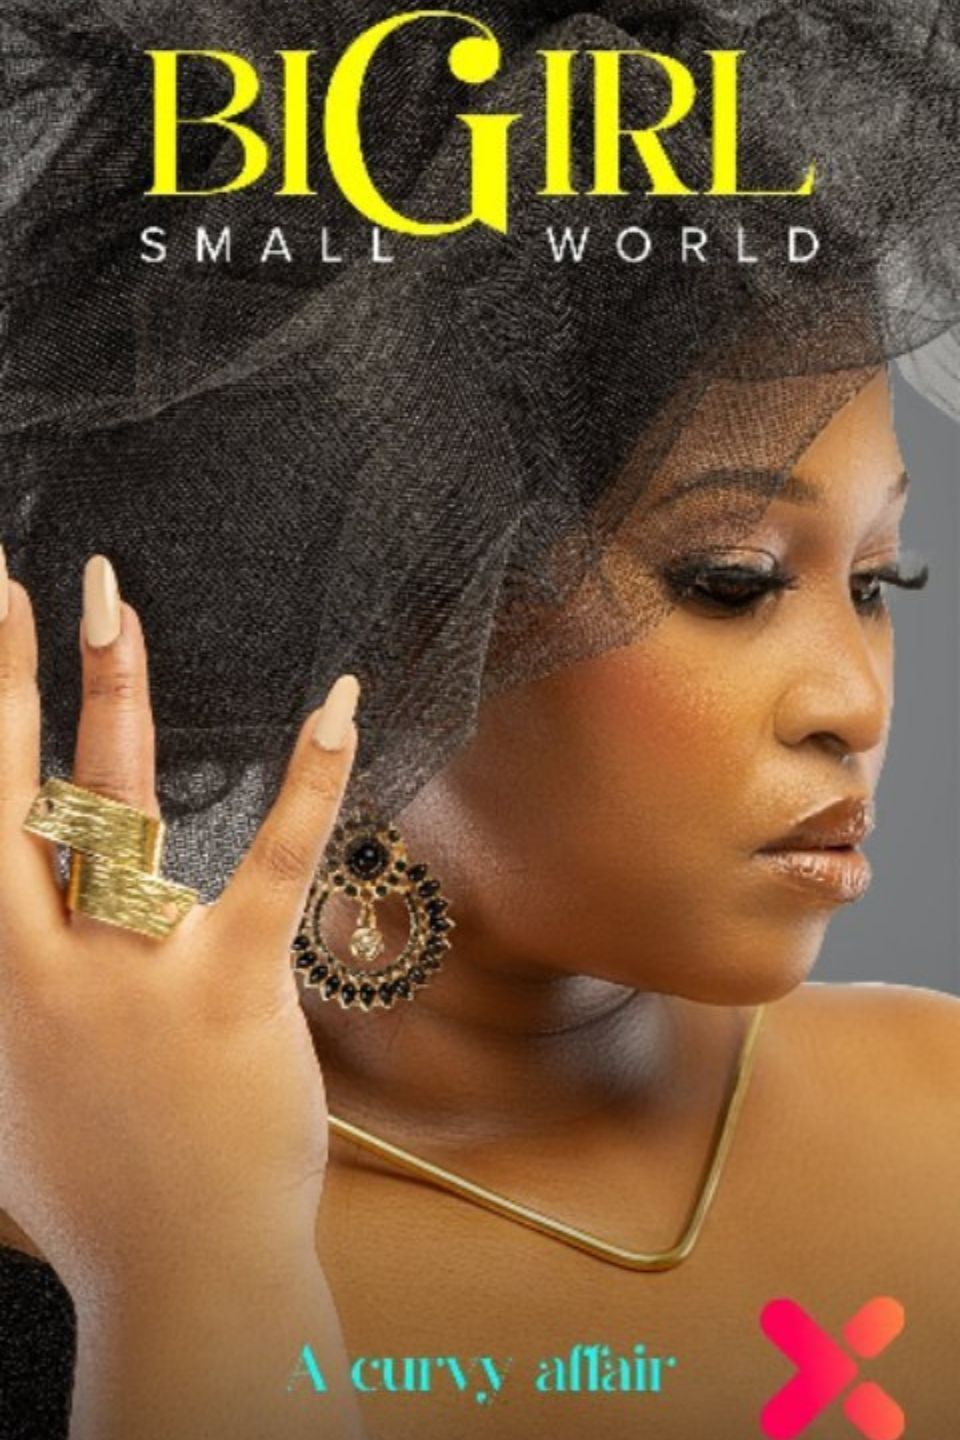 Big Girl Small World S01 (Episode 11 – 13 Added)